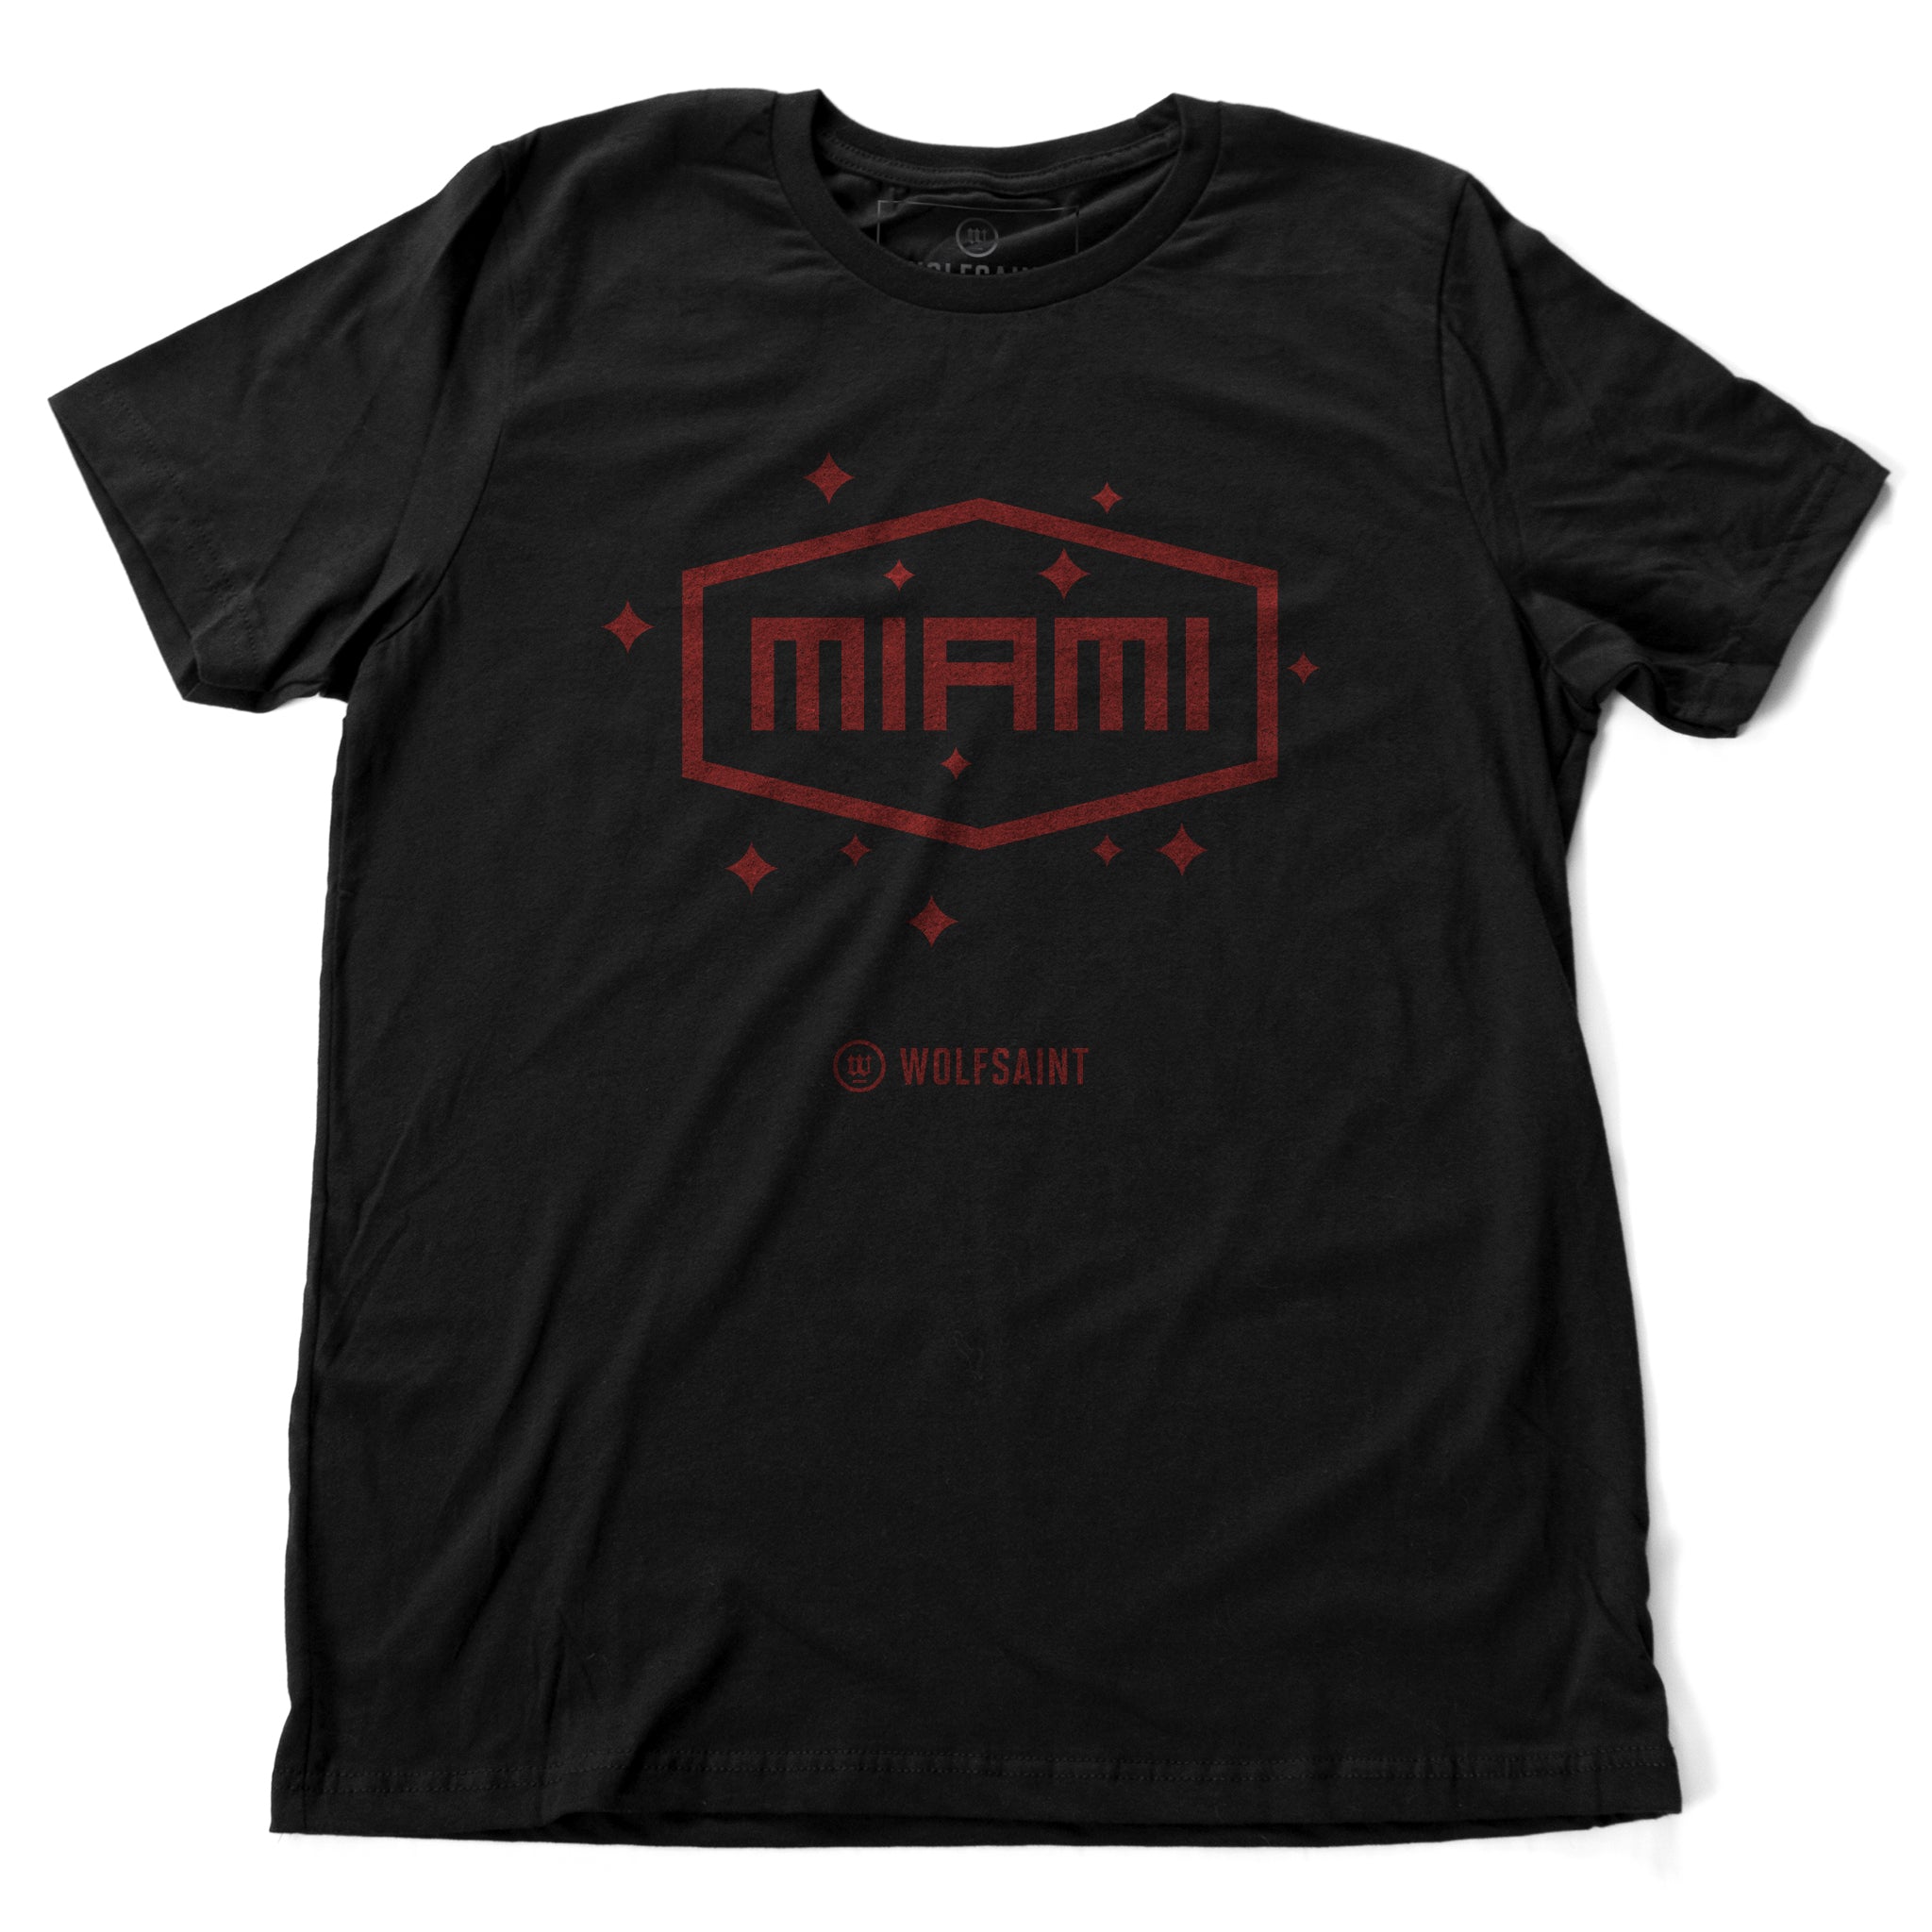 A vintage-inspired, retro fashion t-shirt in classic Black with a simple red “MIAMI” graphic in a field of stars. From wolfsaint.net